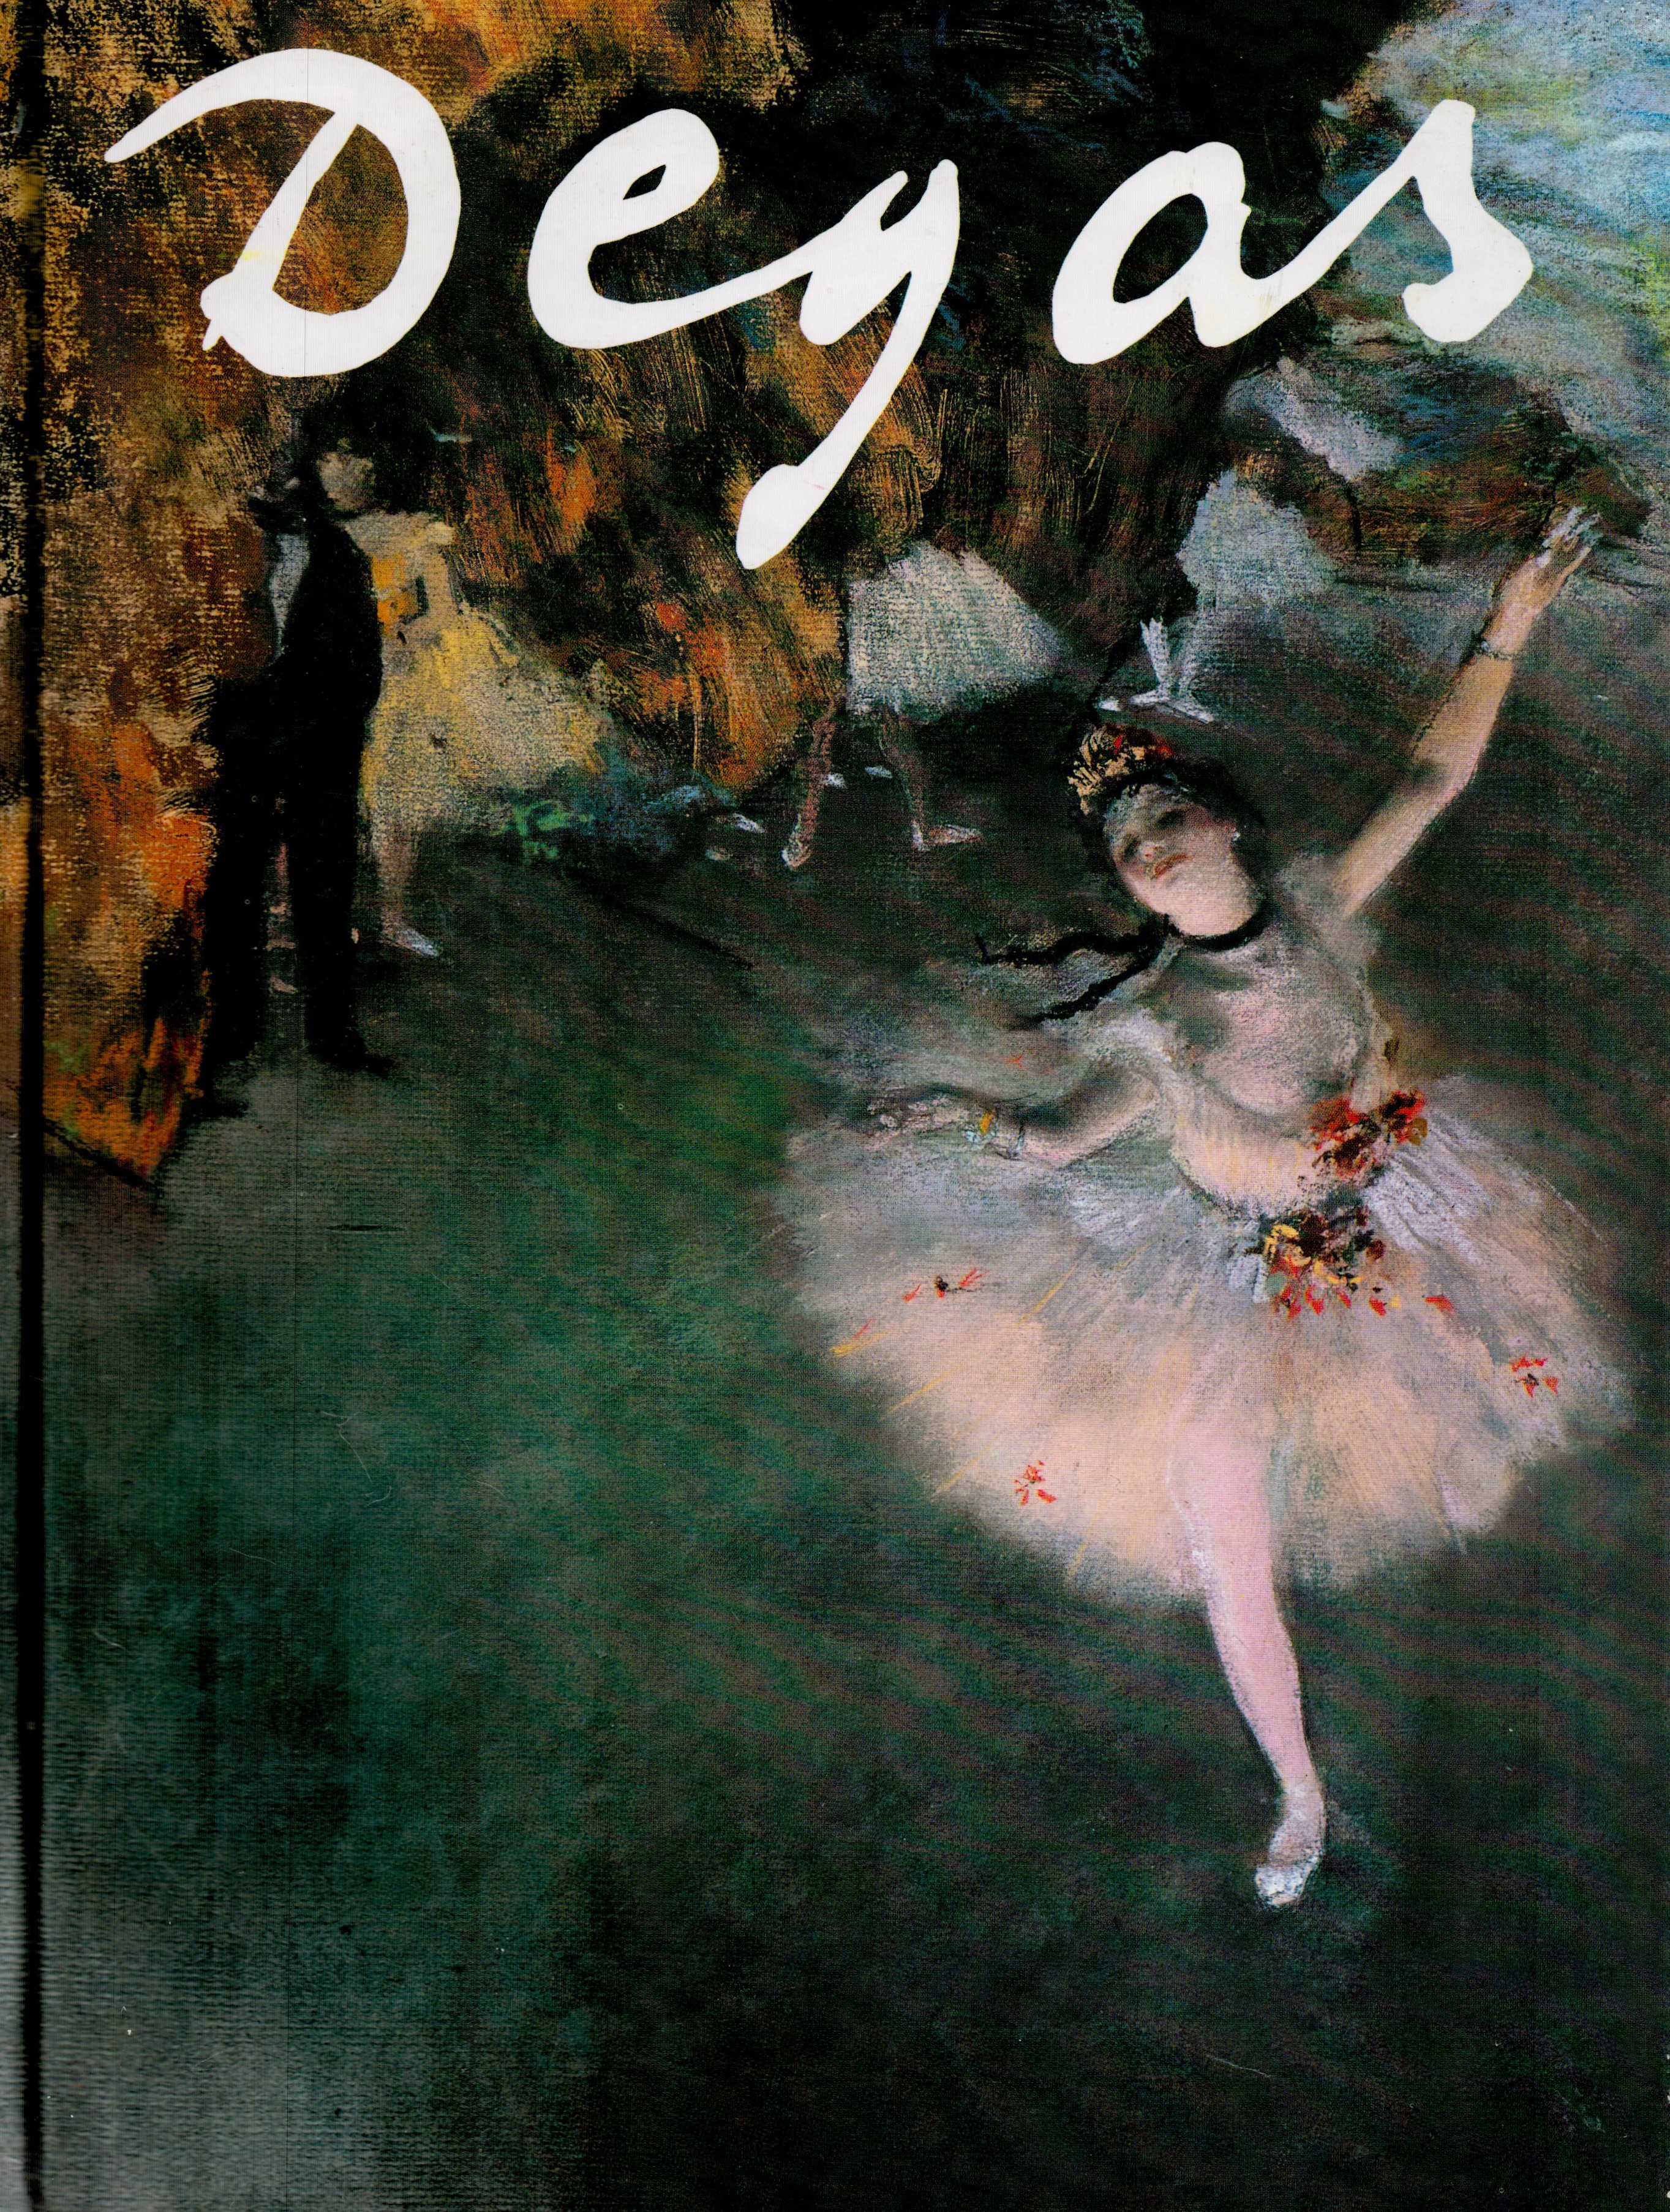 Degas by Sebastian Melmoth Hardback Book 1993 First Edition published by Magna Books some ageing